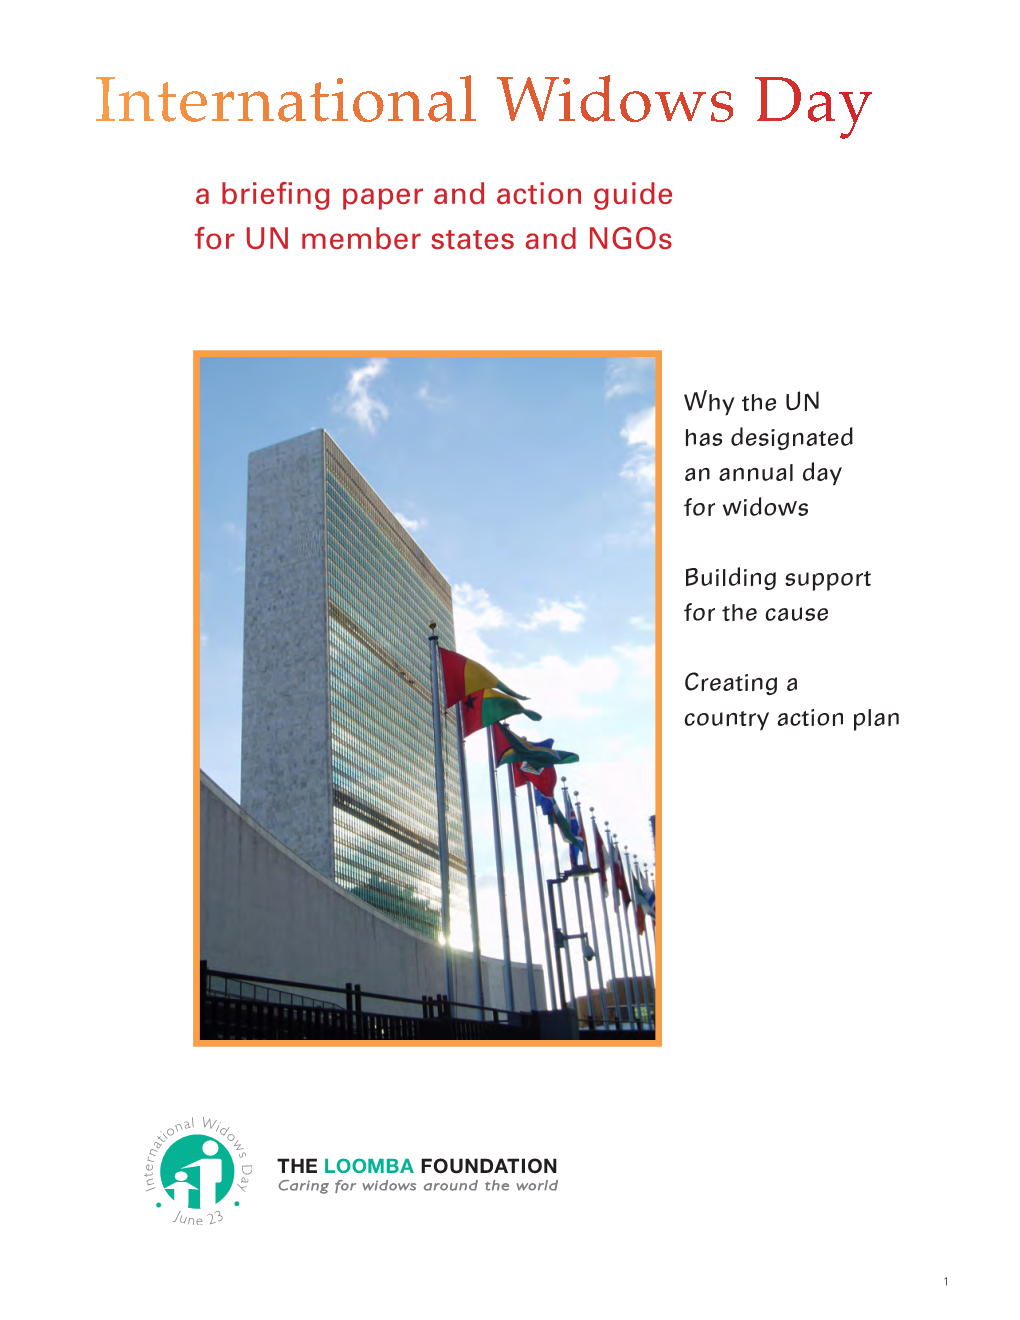 International Widows Day a Briefing Paper and Action Guide for UN Member States and Ngos